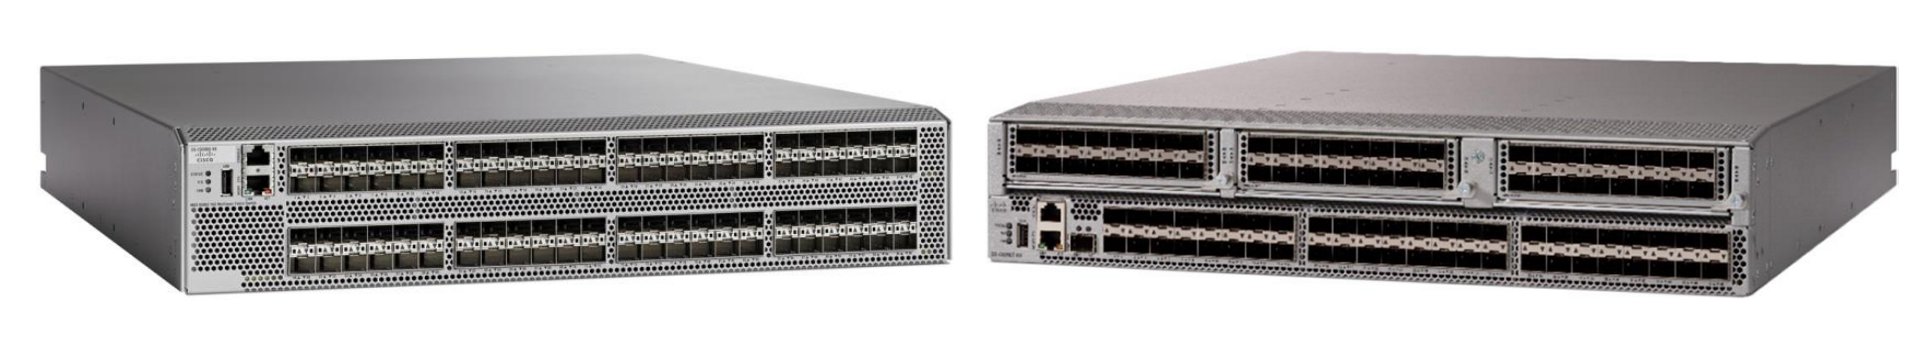 Product image of Cisco MDS 9300 Series Multilayer Fabric Switches